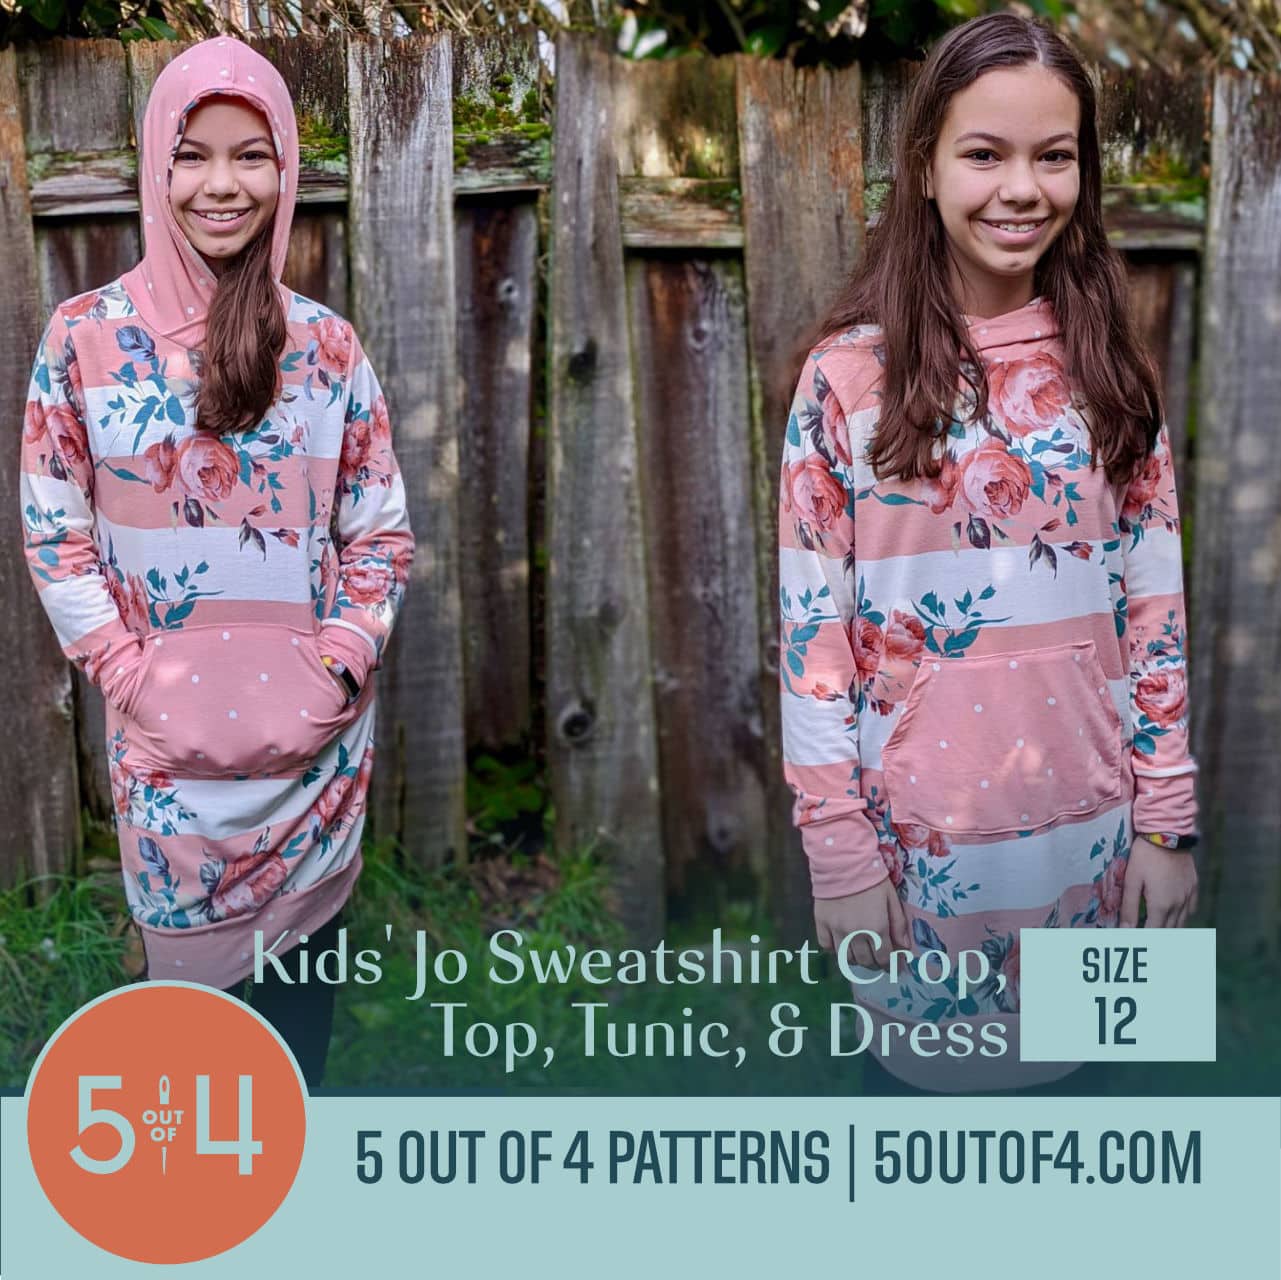 Josephine Sweatshirt Crop, Top, Tunic, and Dress - 5 out of 4 Patterns